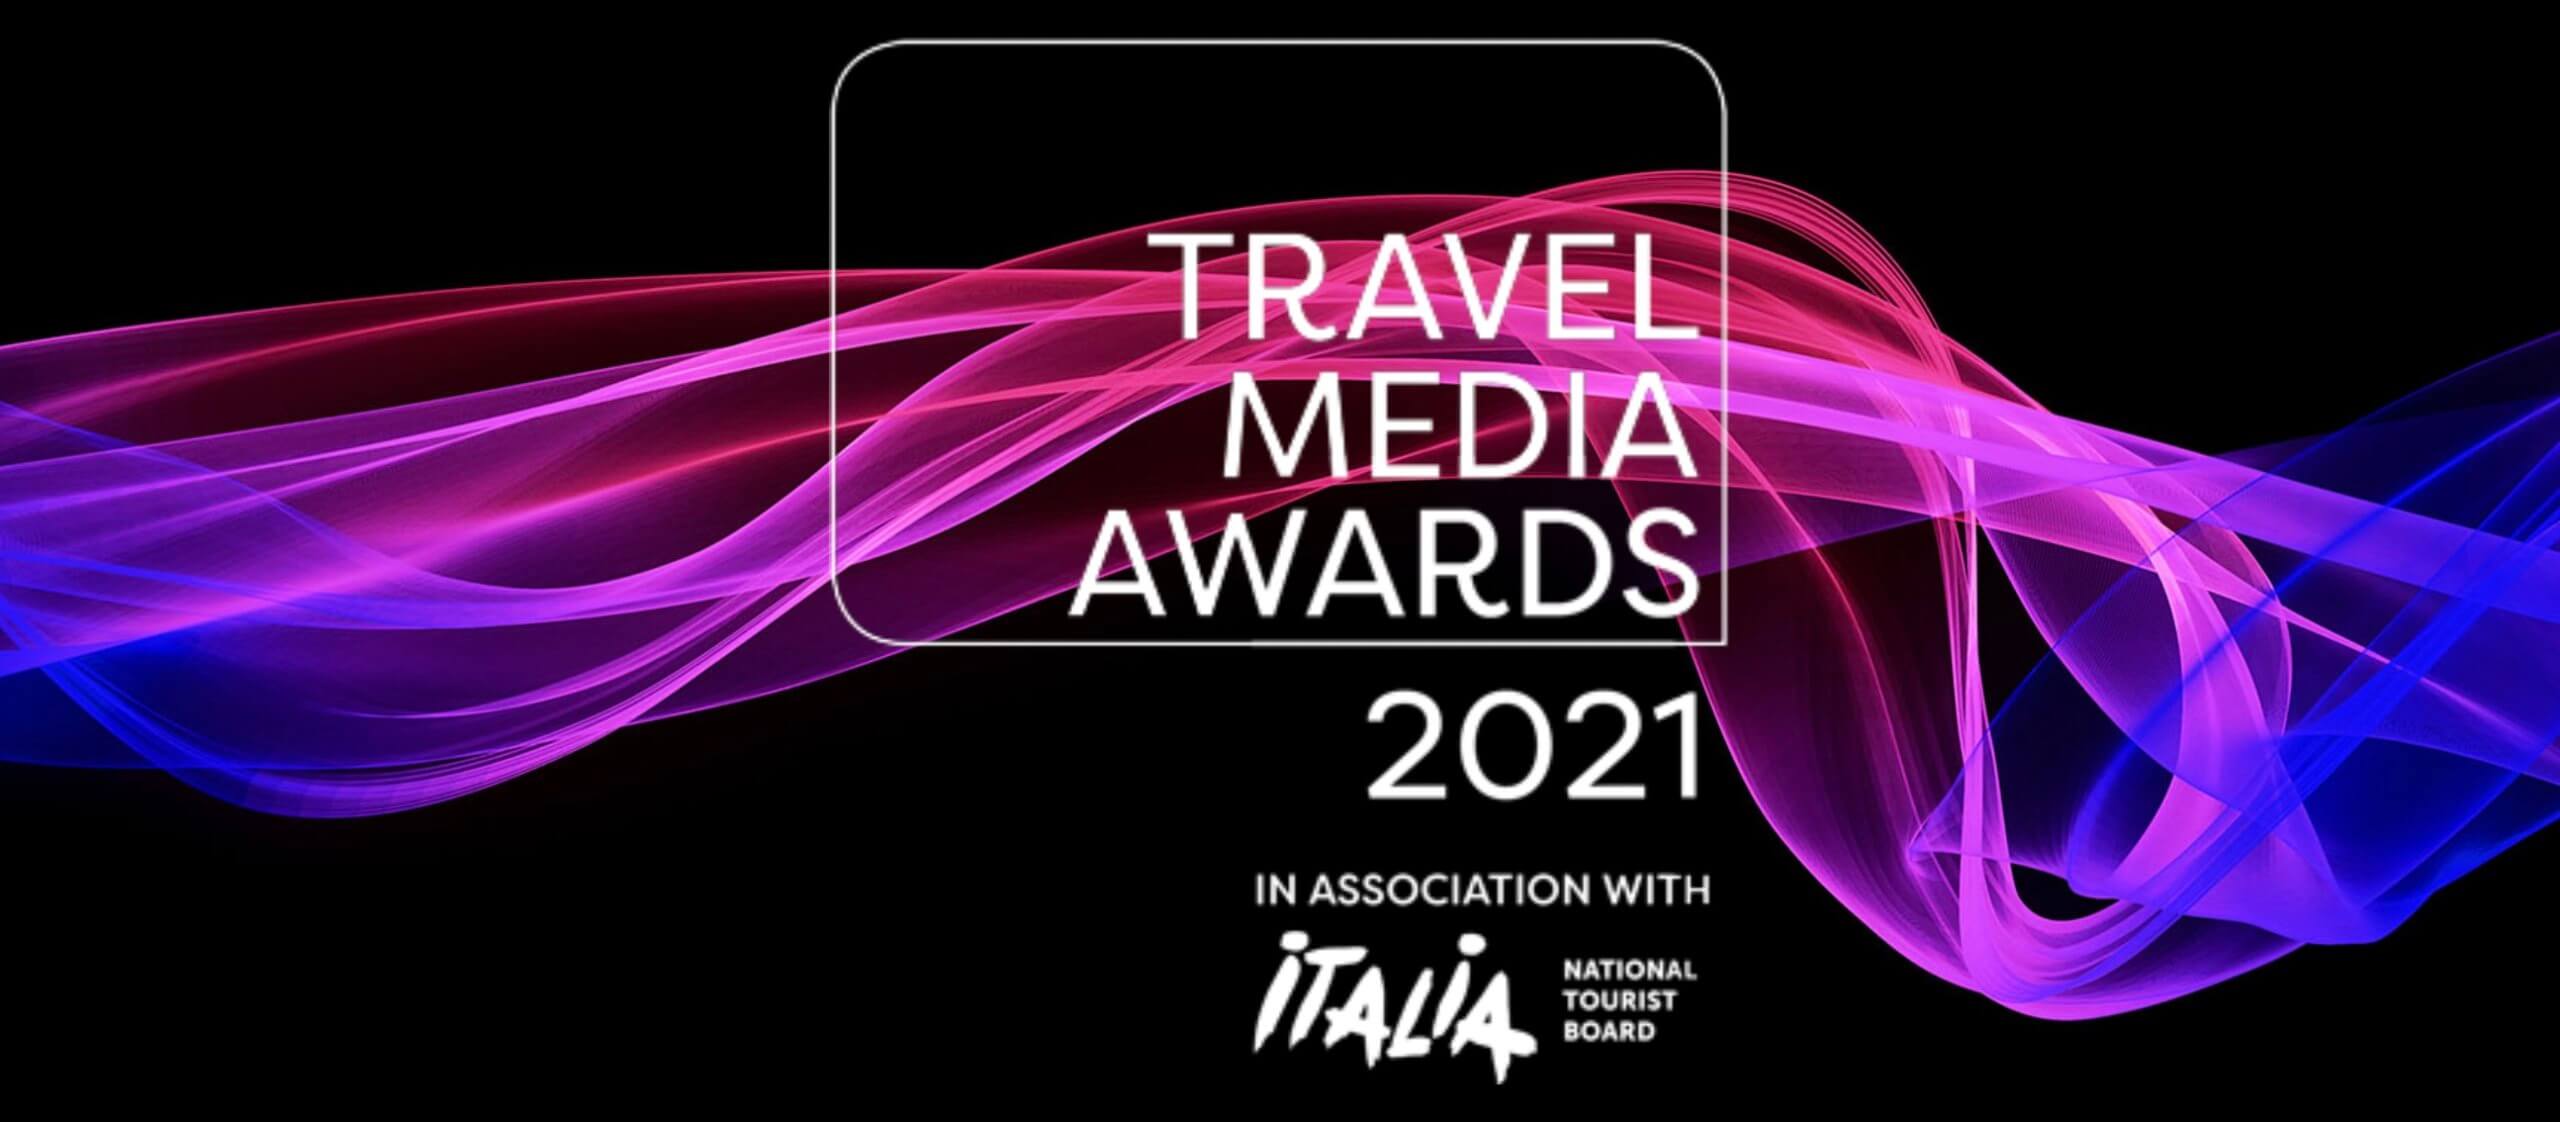 Day Out in England is a FINALIST in the Travel Media Awards 2021!